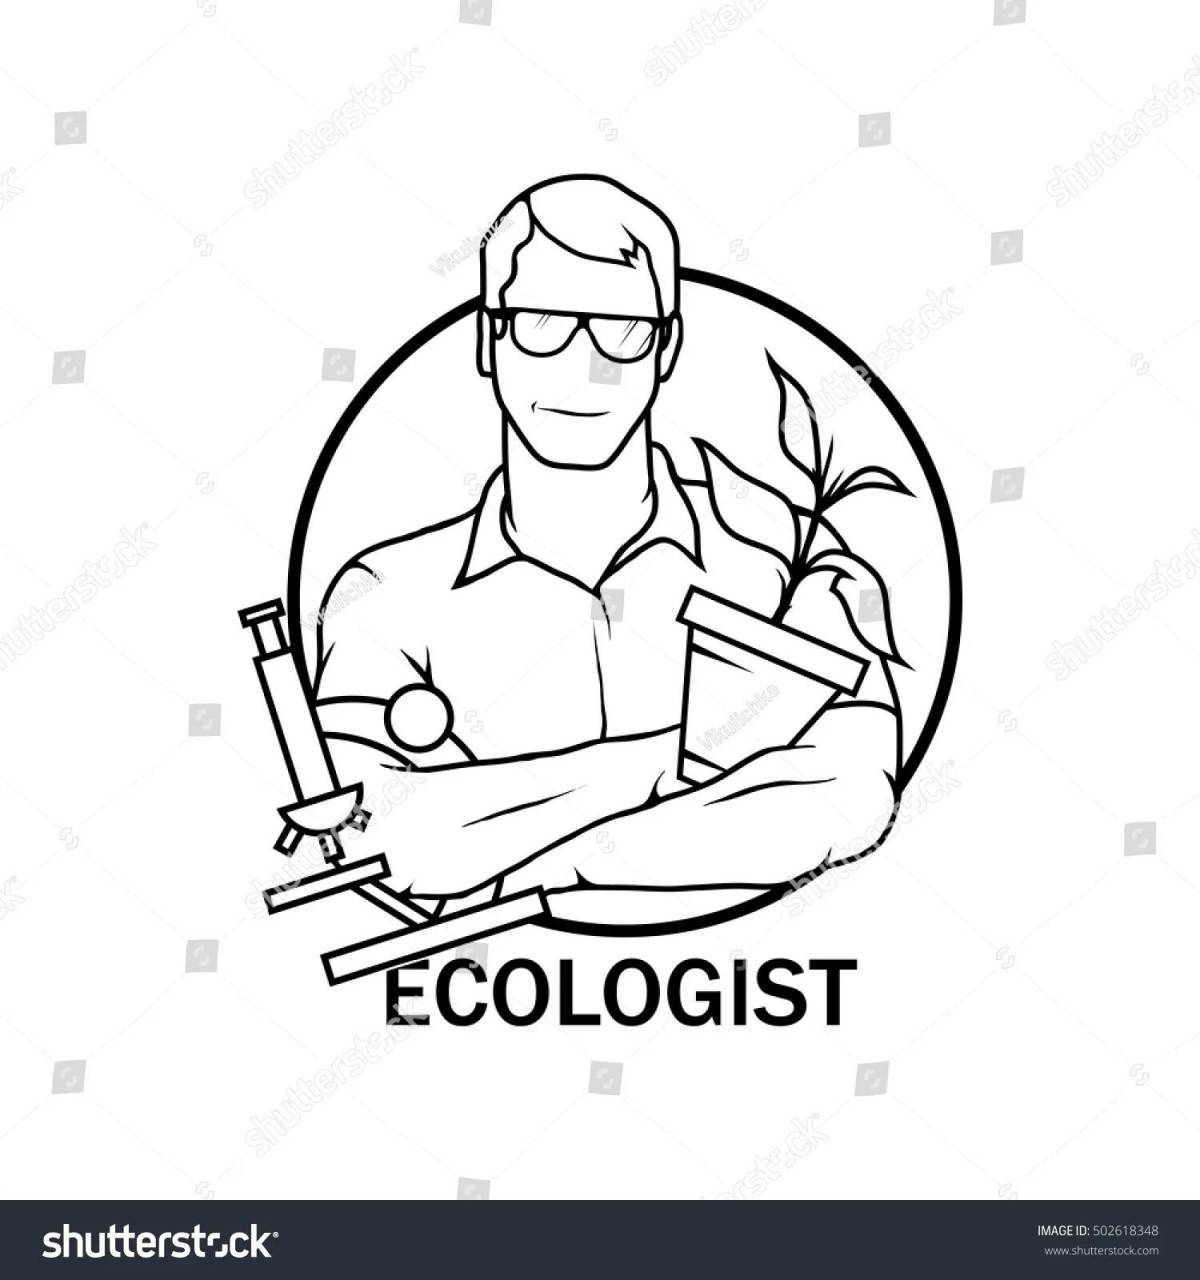 Glowing ecologist coloring page